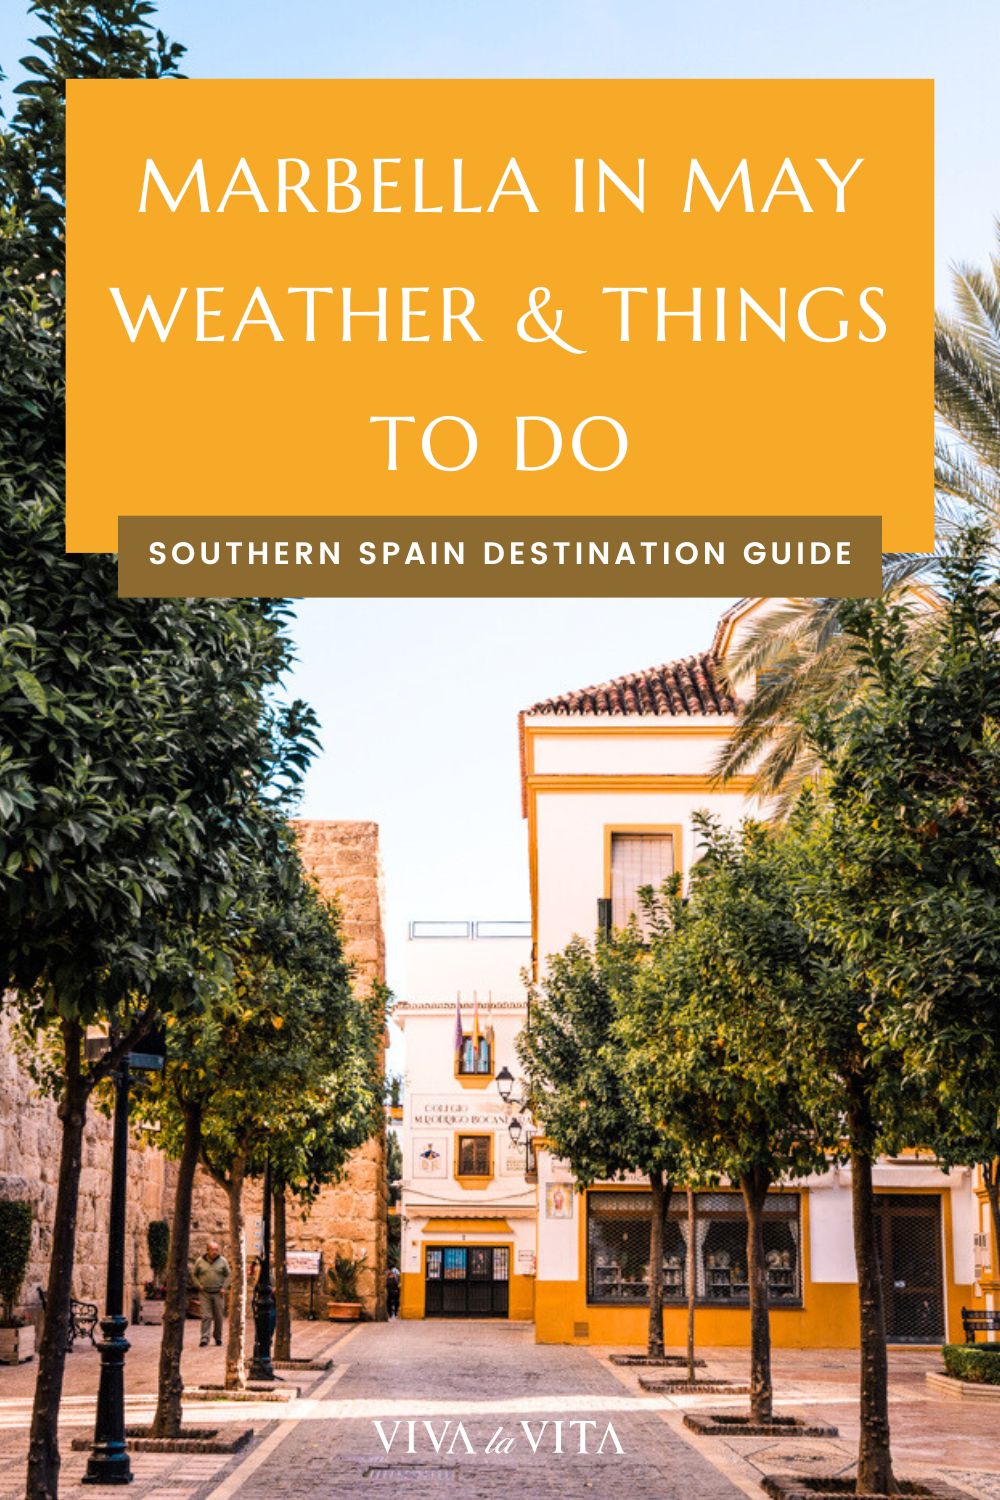 pinterest image showing a street with orange trees in the old town of Marbella with a church and headline - marbella weather in may, weather and things to do.